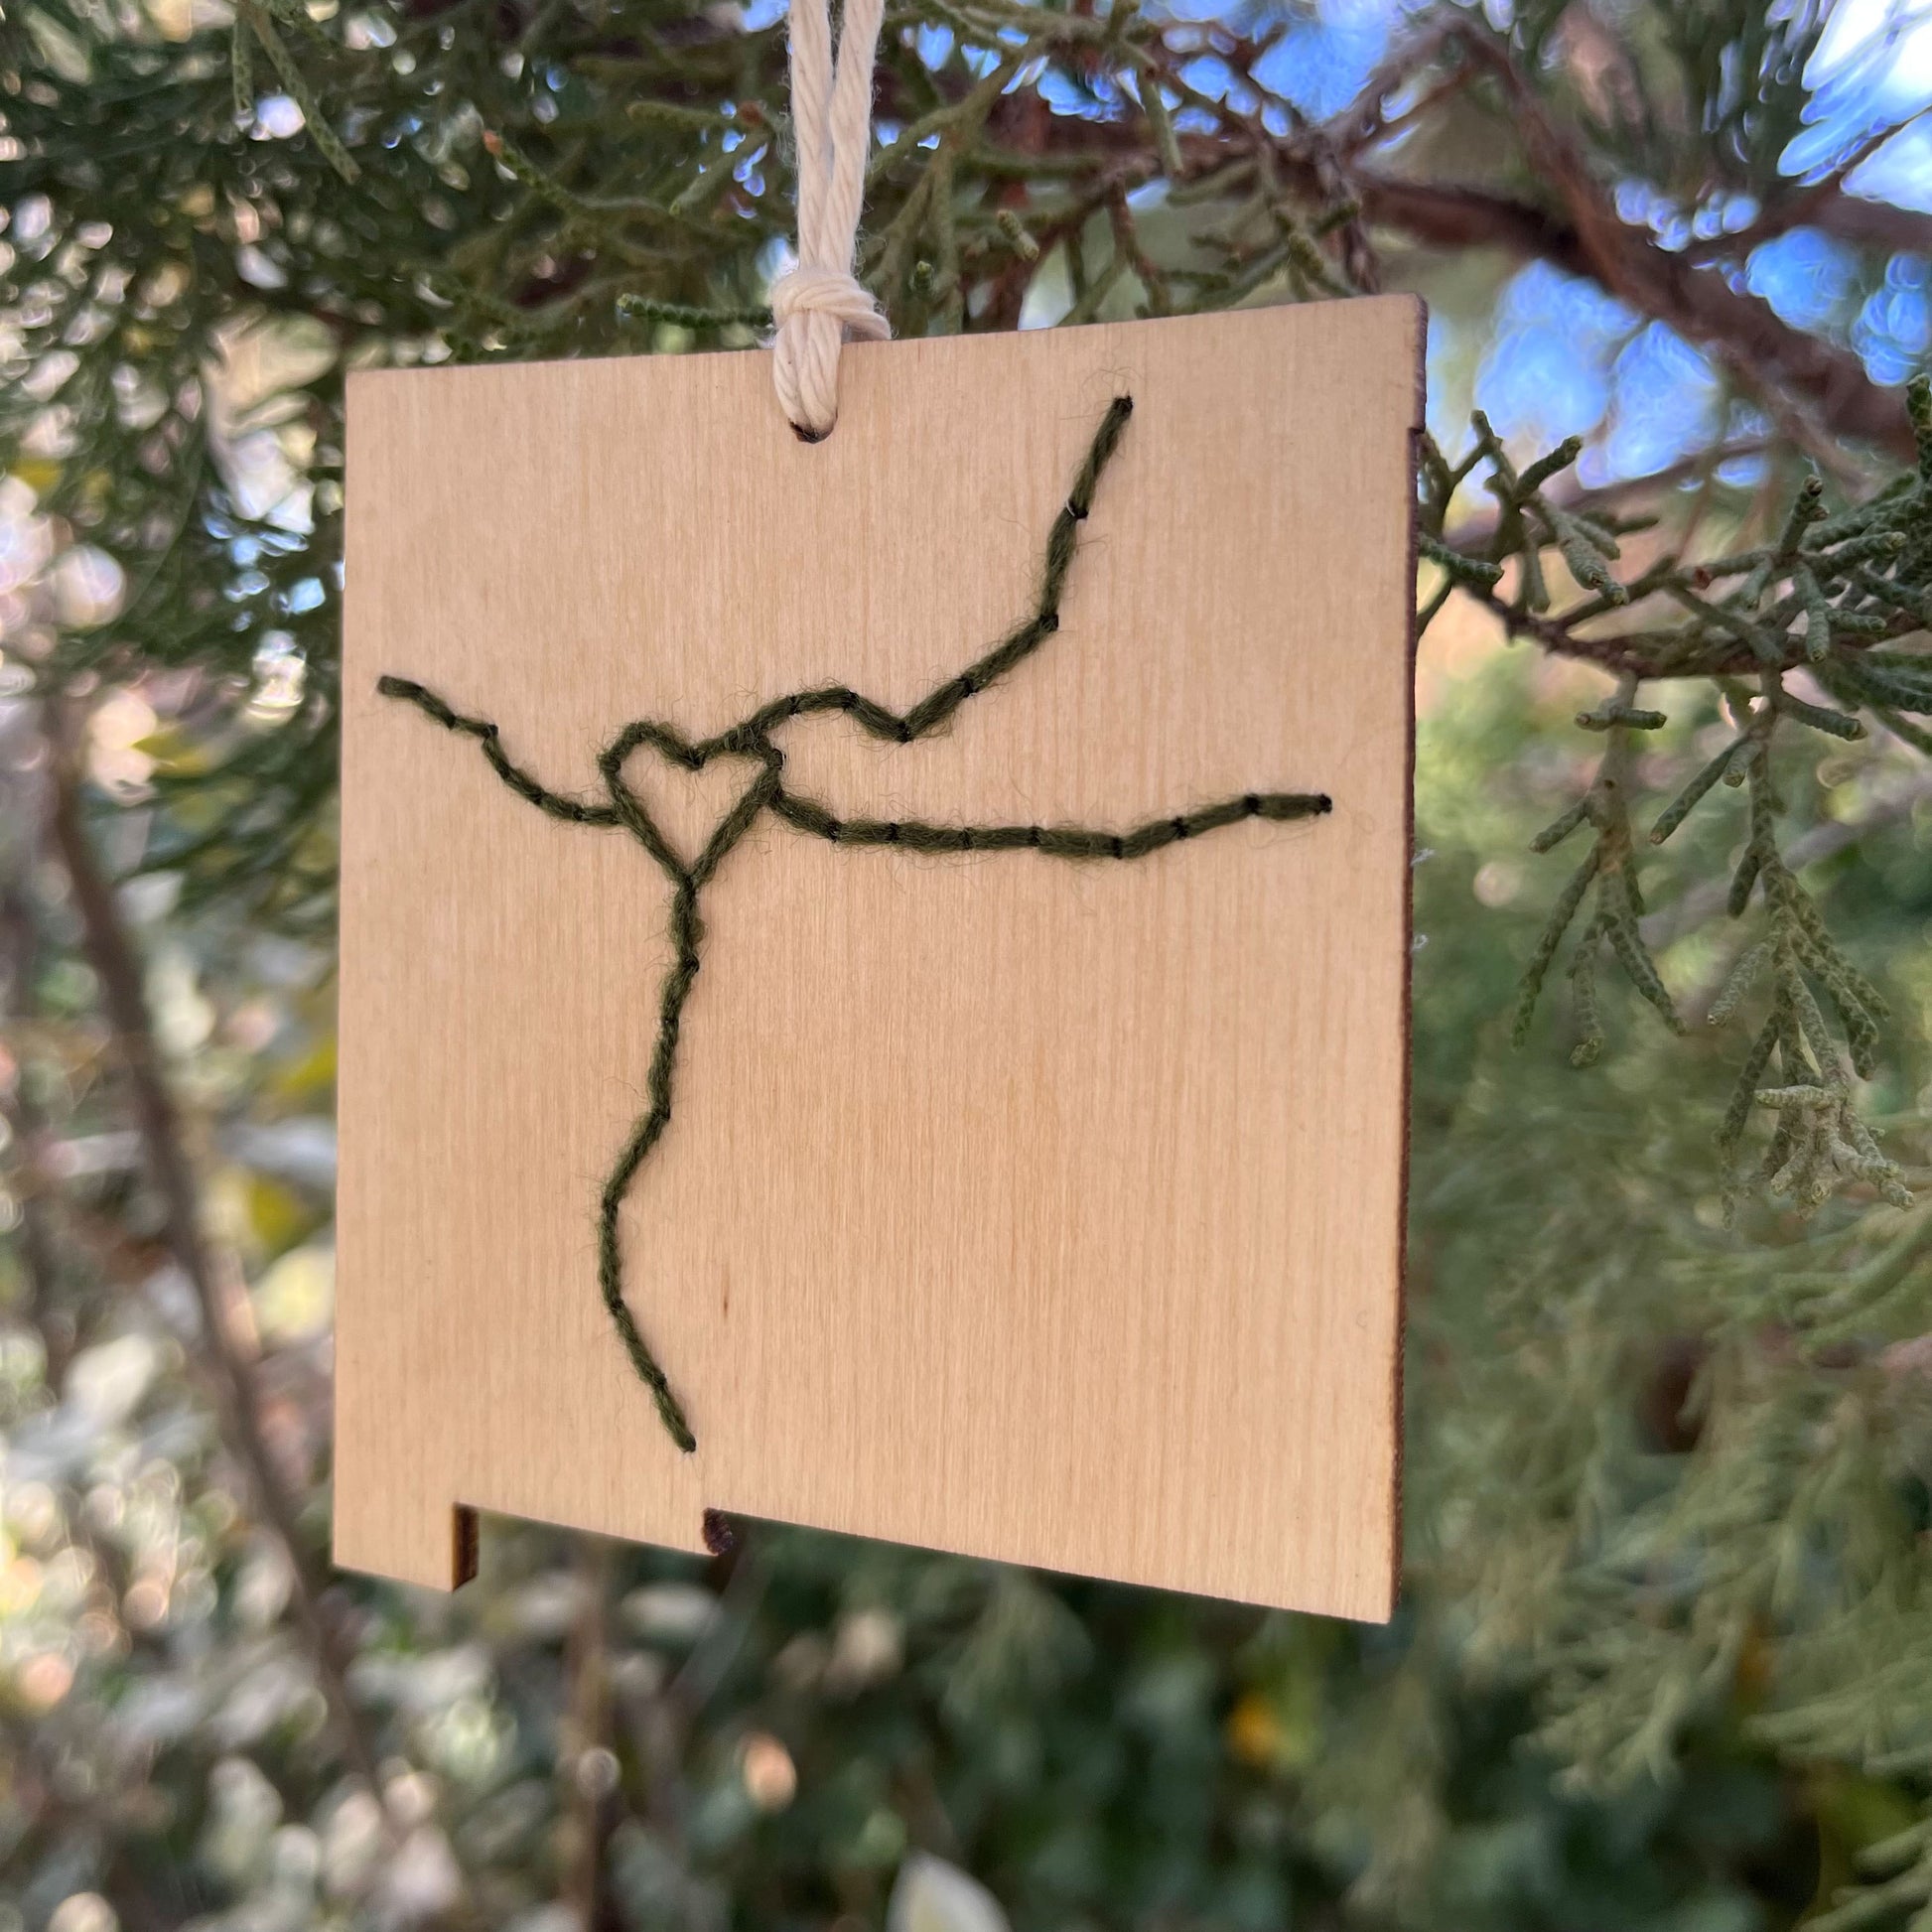 a laser cut wood ornament in the shape of New Mexico, hand embroidered in pine green with a heart where Albuquerque is, and Interstate 25 and 40, with an off white cord loop hanging on a pine tree